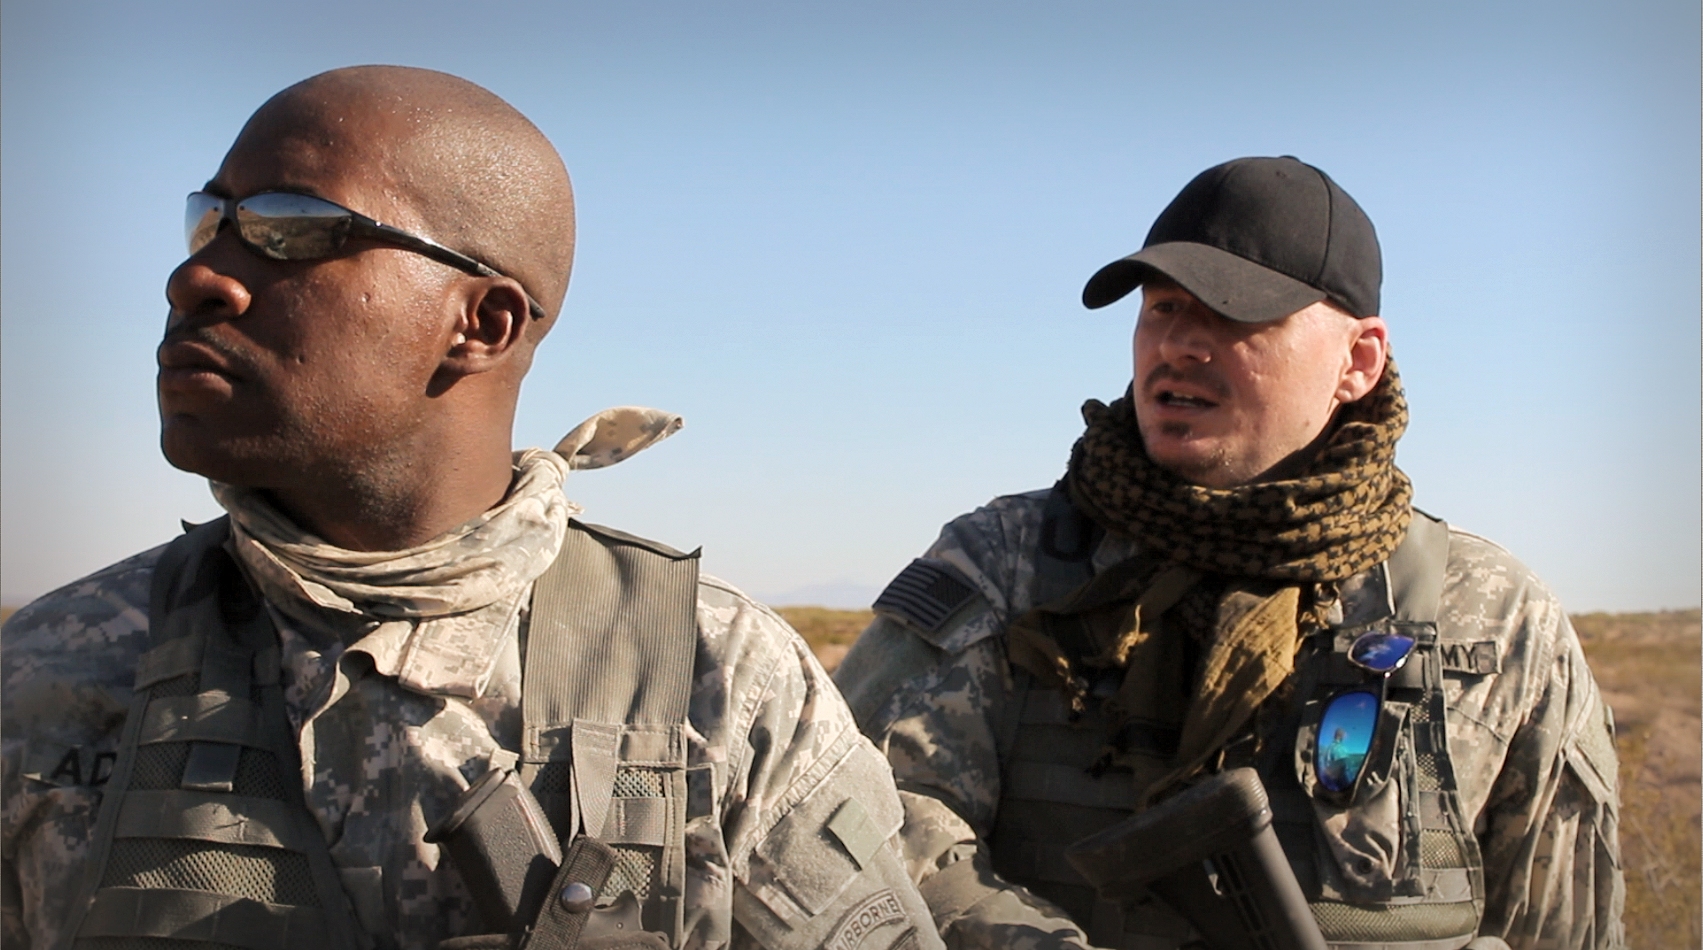 Shawn Lecrone and Dion Lewis on the set of Southwest for the Afghanistan Ambush scene.